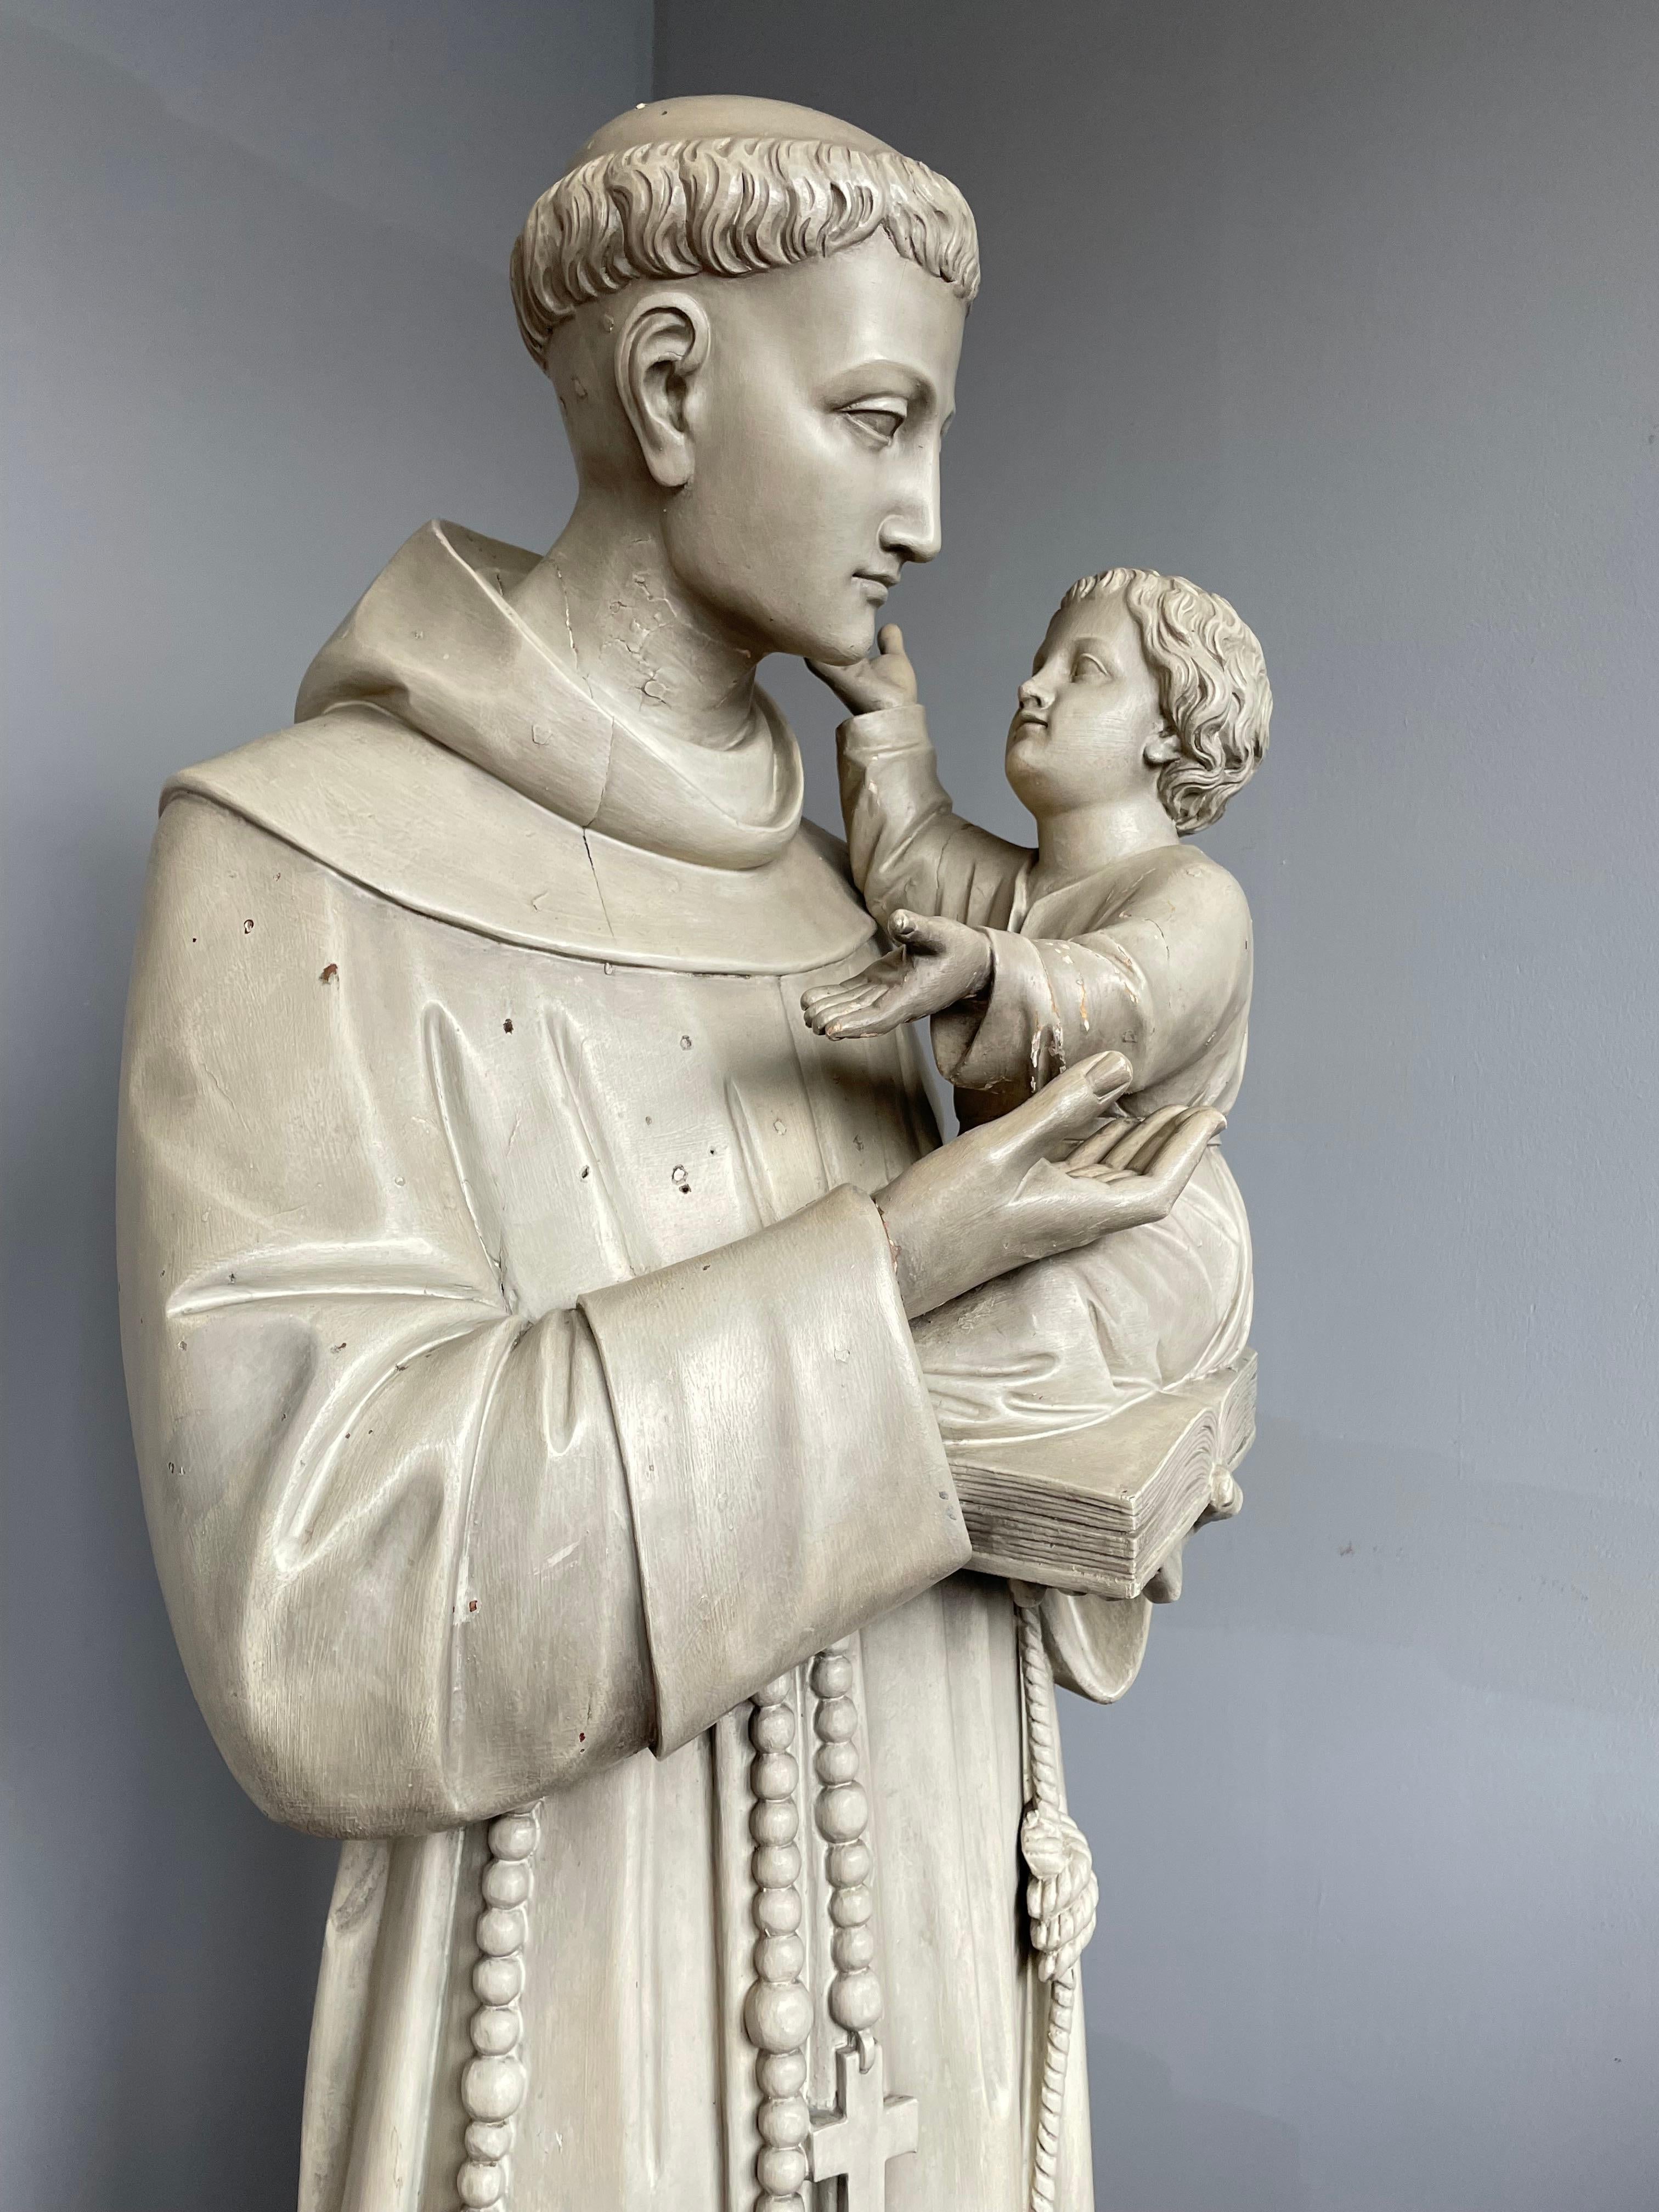 Finest quality carved statue of Saint Anthony holding the child Jesus.

This rare wooden statue of Saint Anthony and the child Jesus is in very good condition. This work of religious art is all handcarved out of solid wood and it has the color of